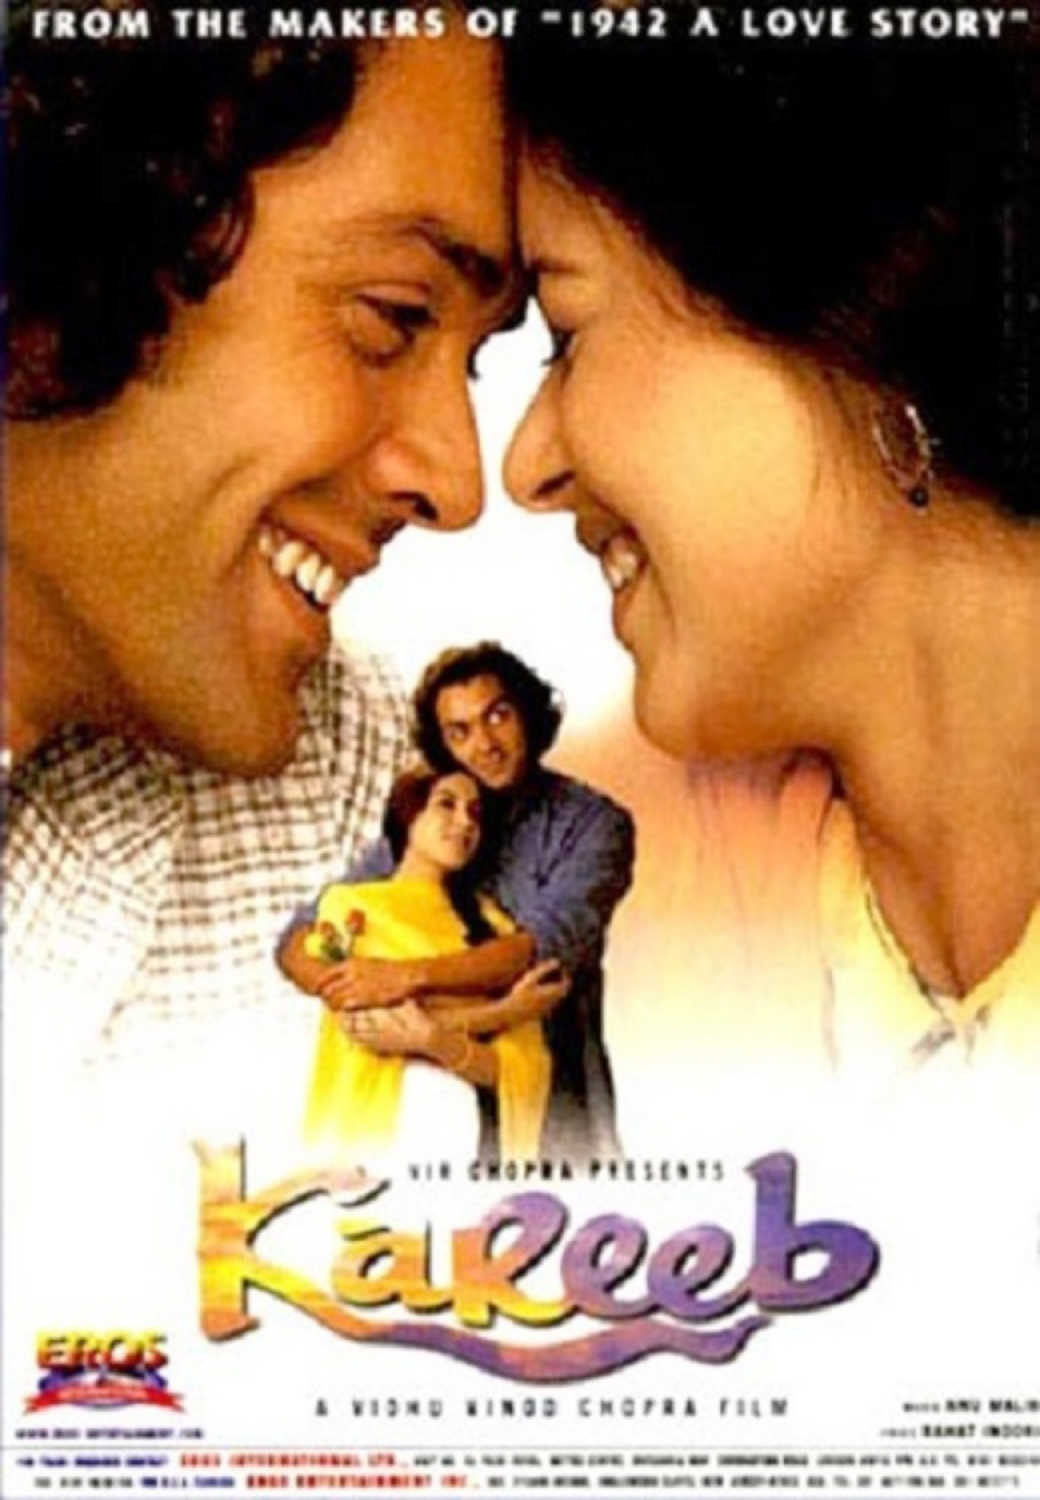 Poster for the movie "Kareeb"